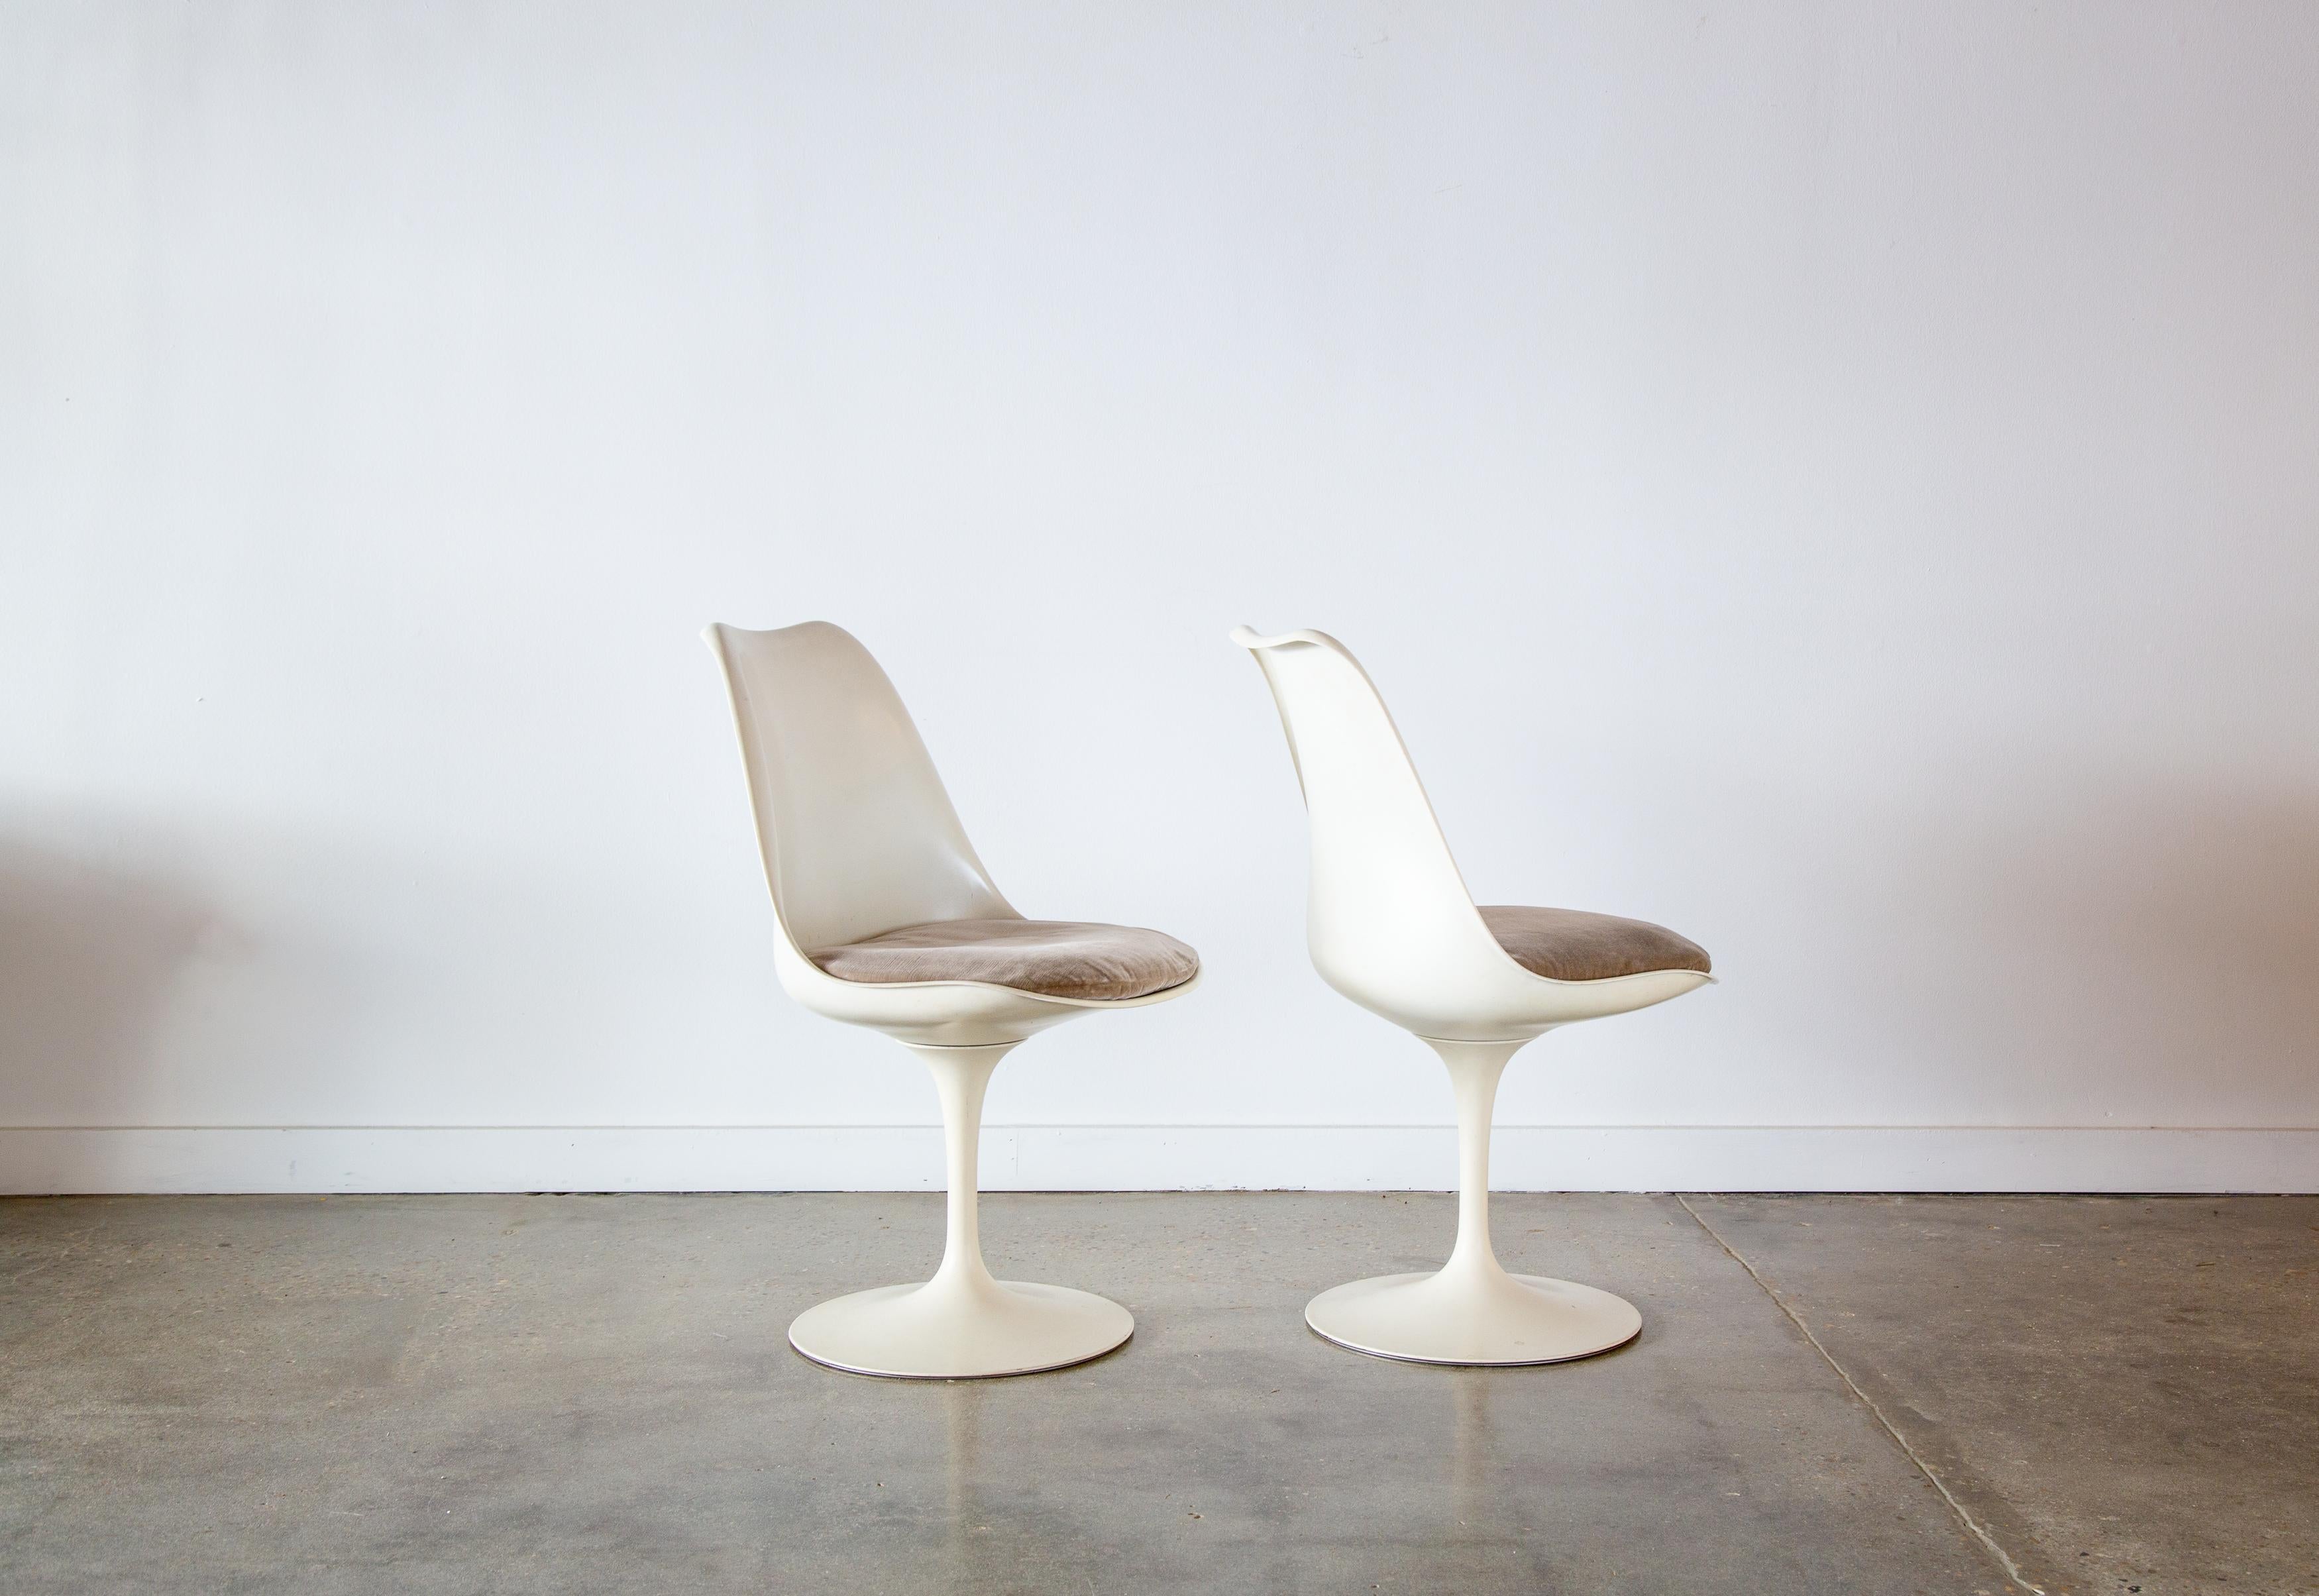 Mid-Century Modern 1950s Early Tulip Swivel Chairs by Eero Saarinen for Knoll - a pair For Sale